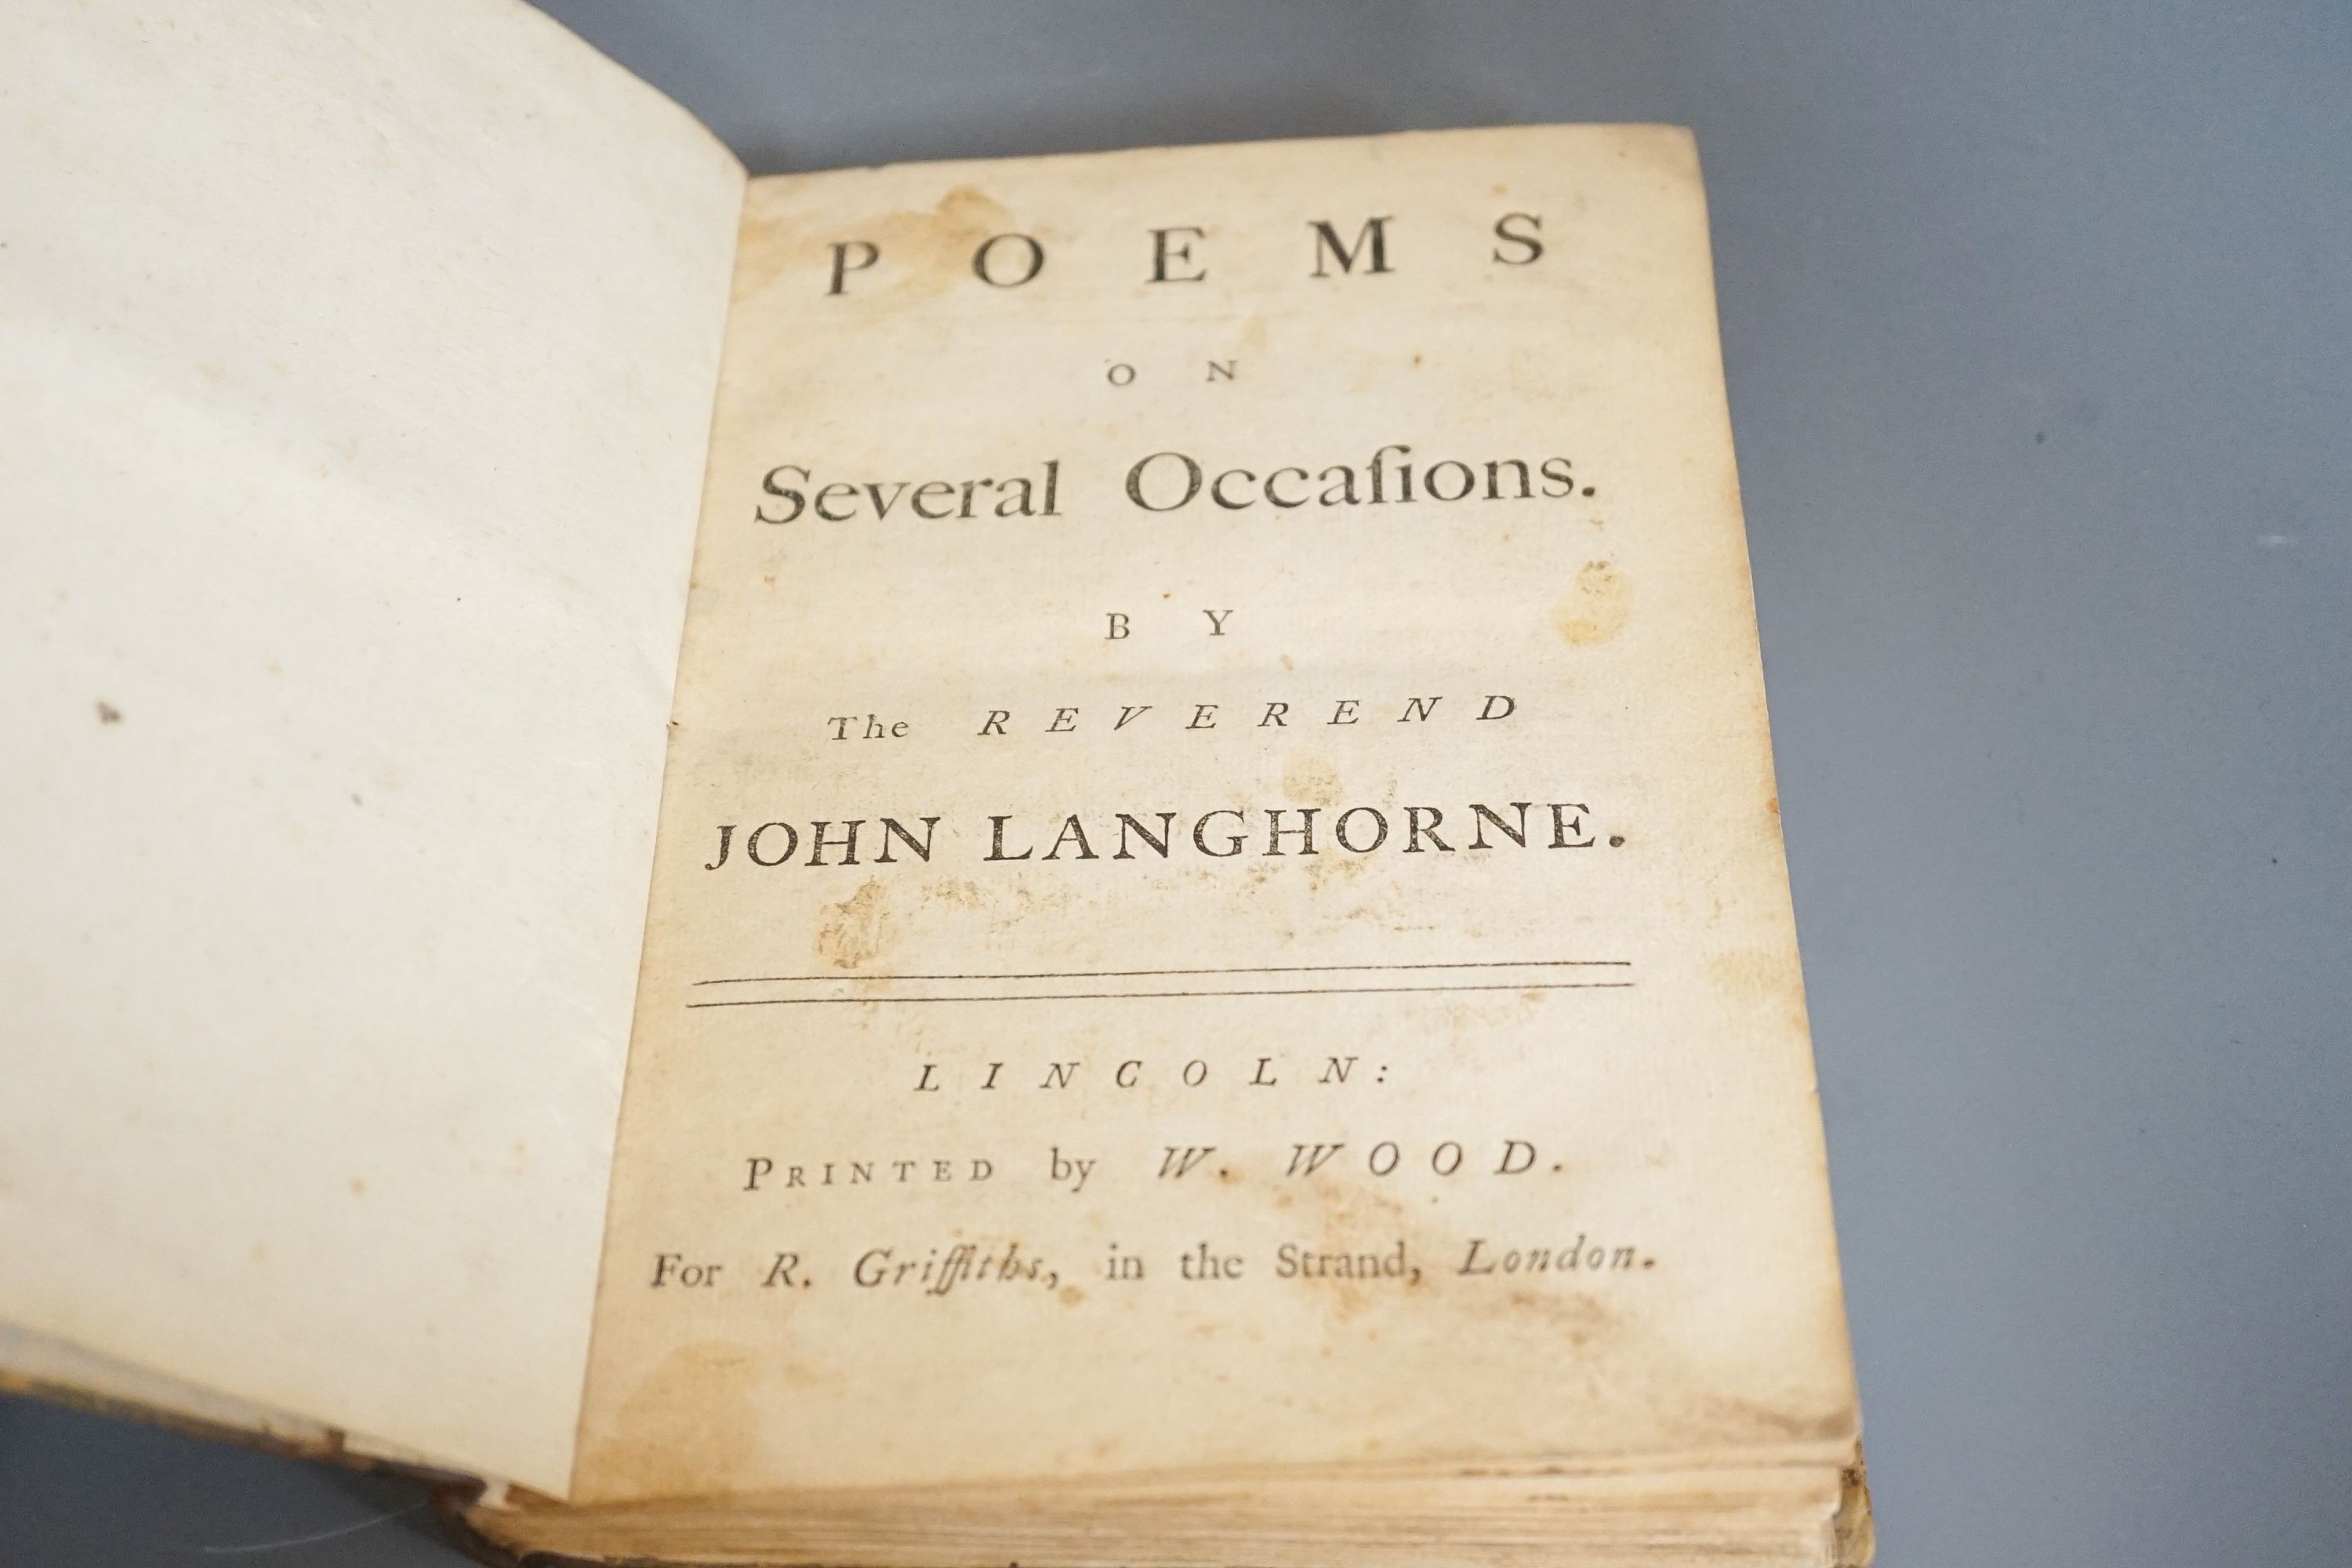 Langhorne, John - Poems on Several Occasions, small qto, quarter calf, lacking contents leaf, R. Griffiths, London [1760], Gay, John - The